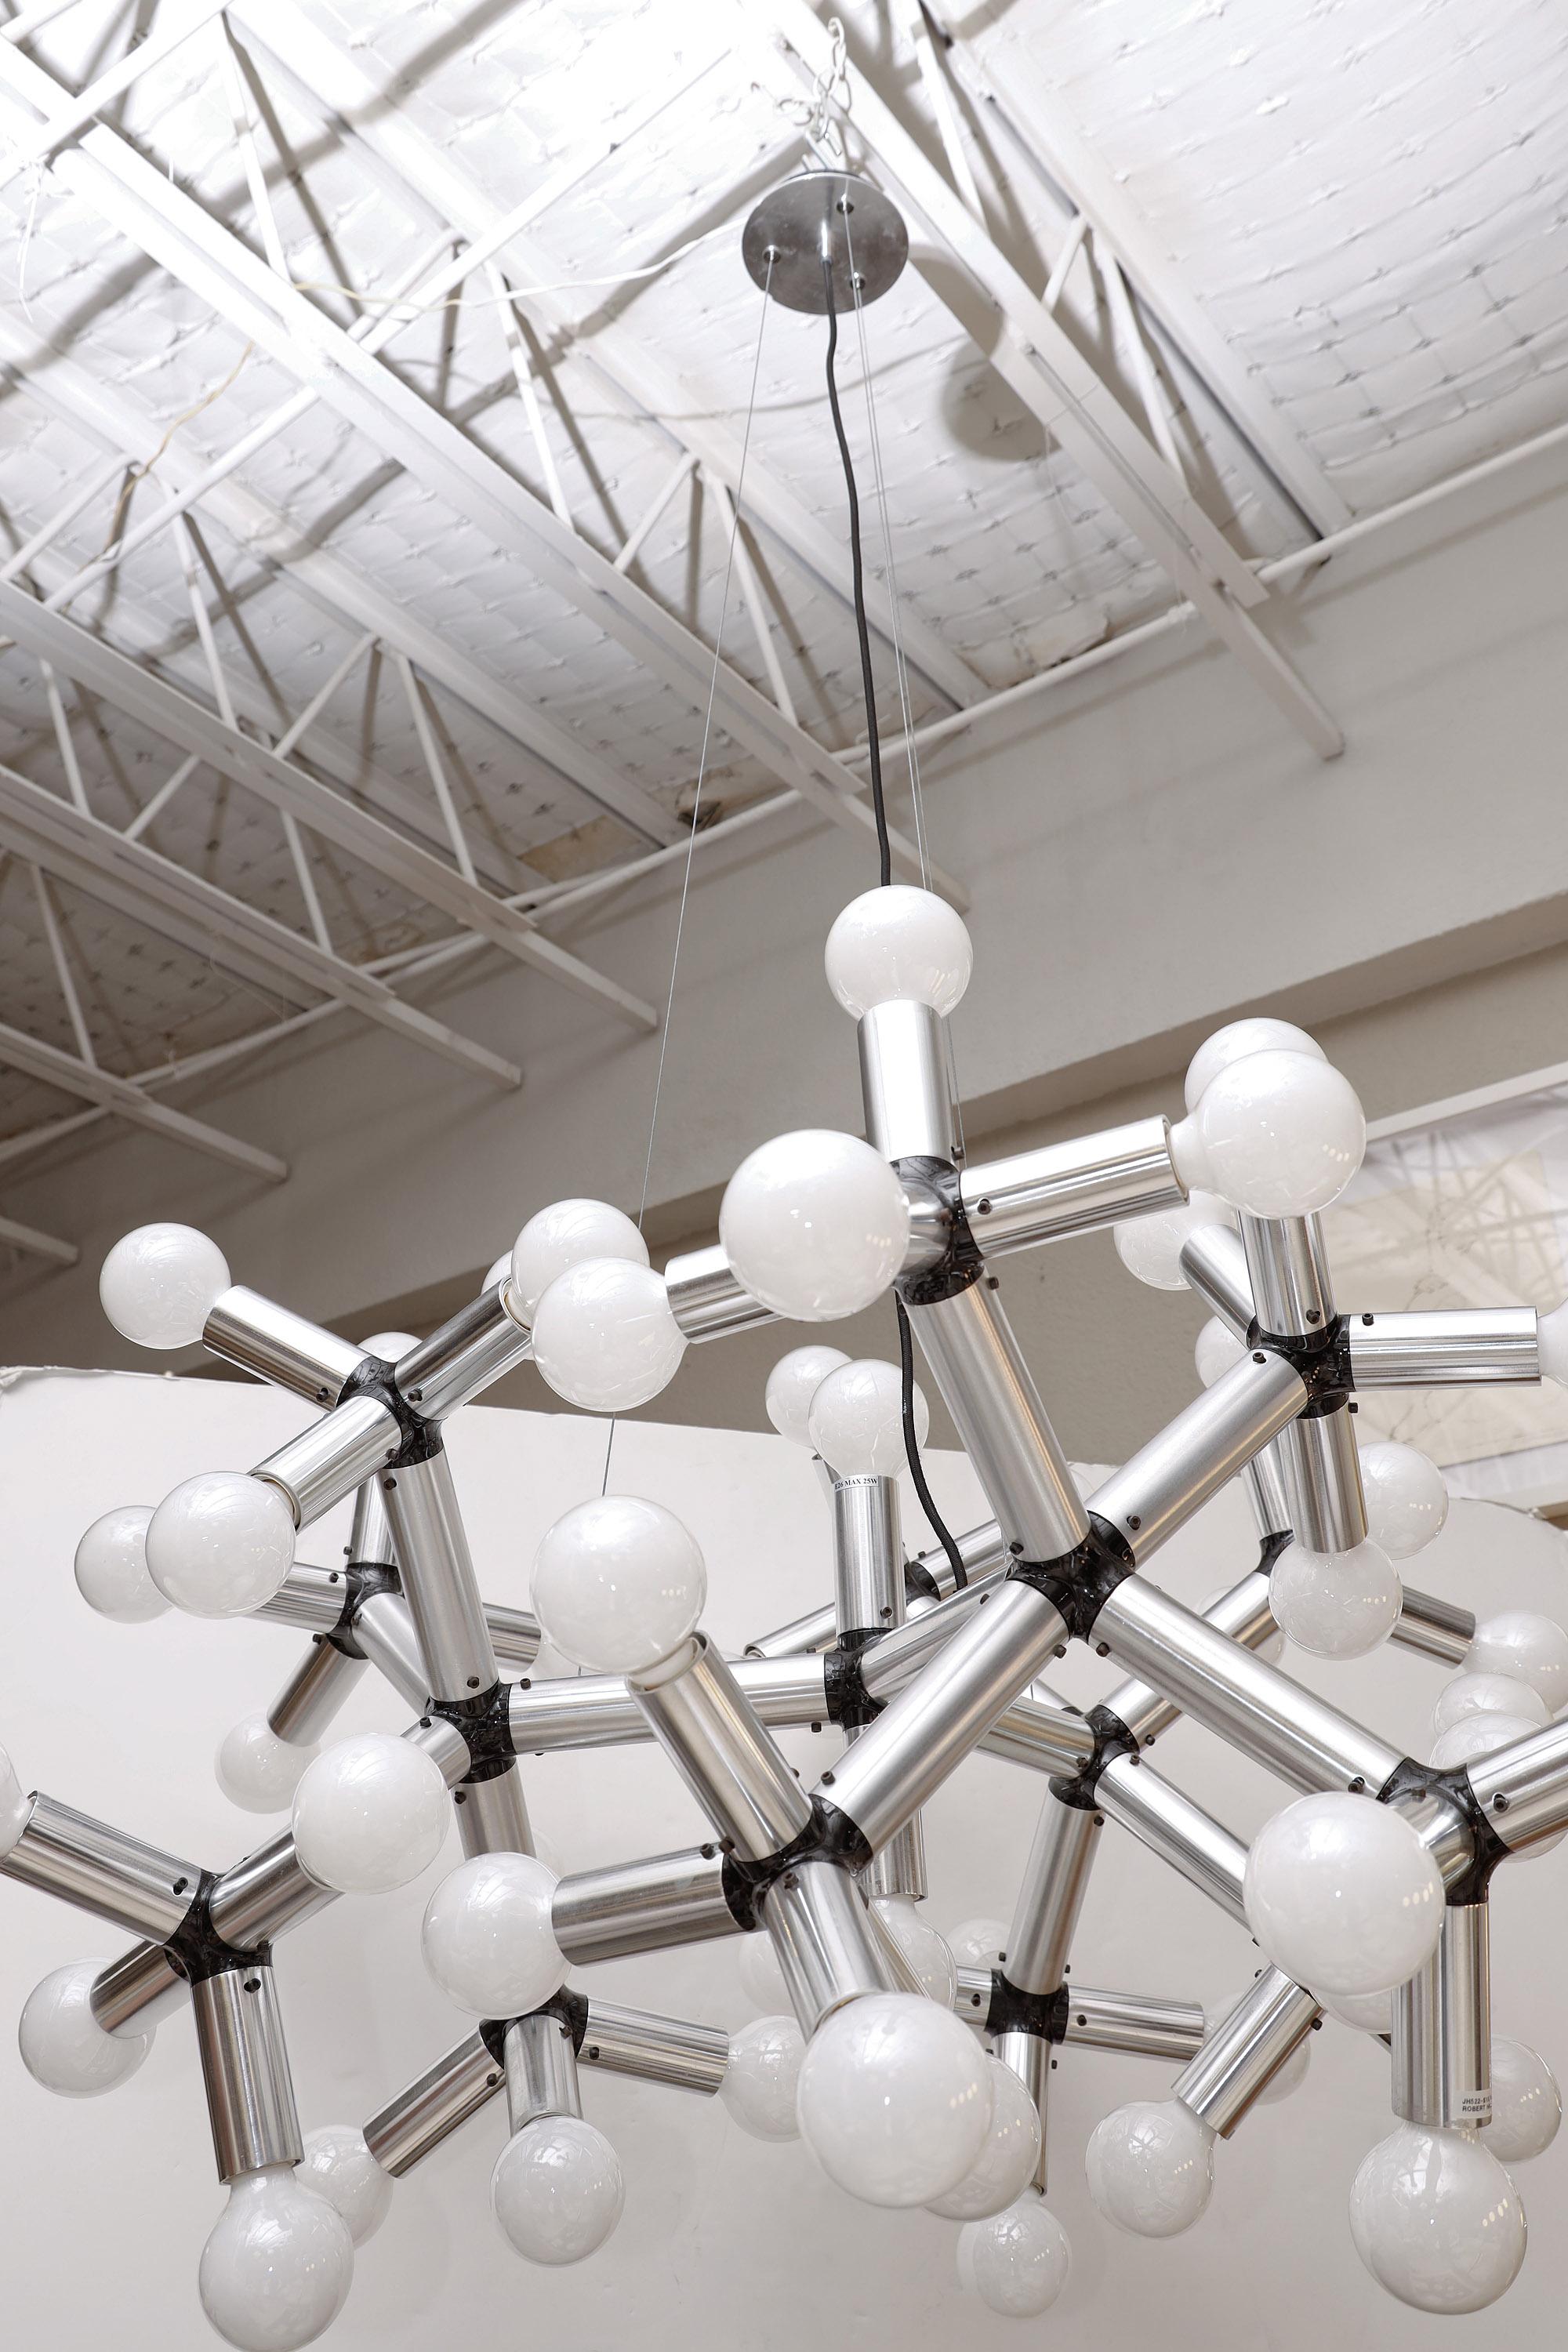 Swiss 1969 Robert Haussman Aluminum Atomic Suspension Light 'Two Available' For Sale